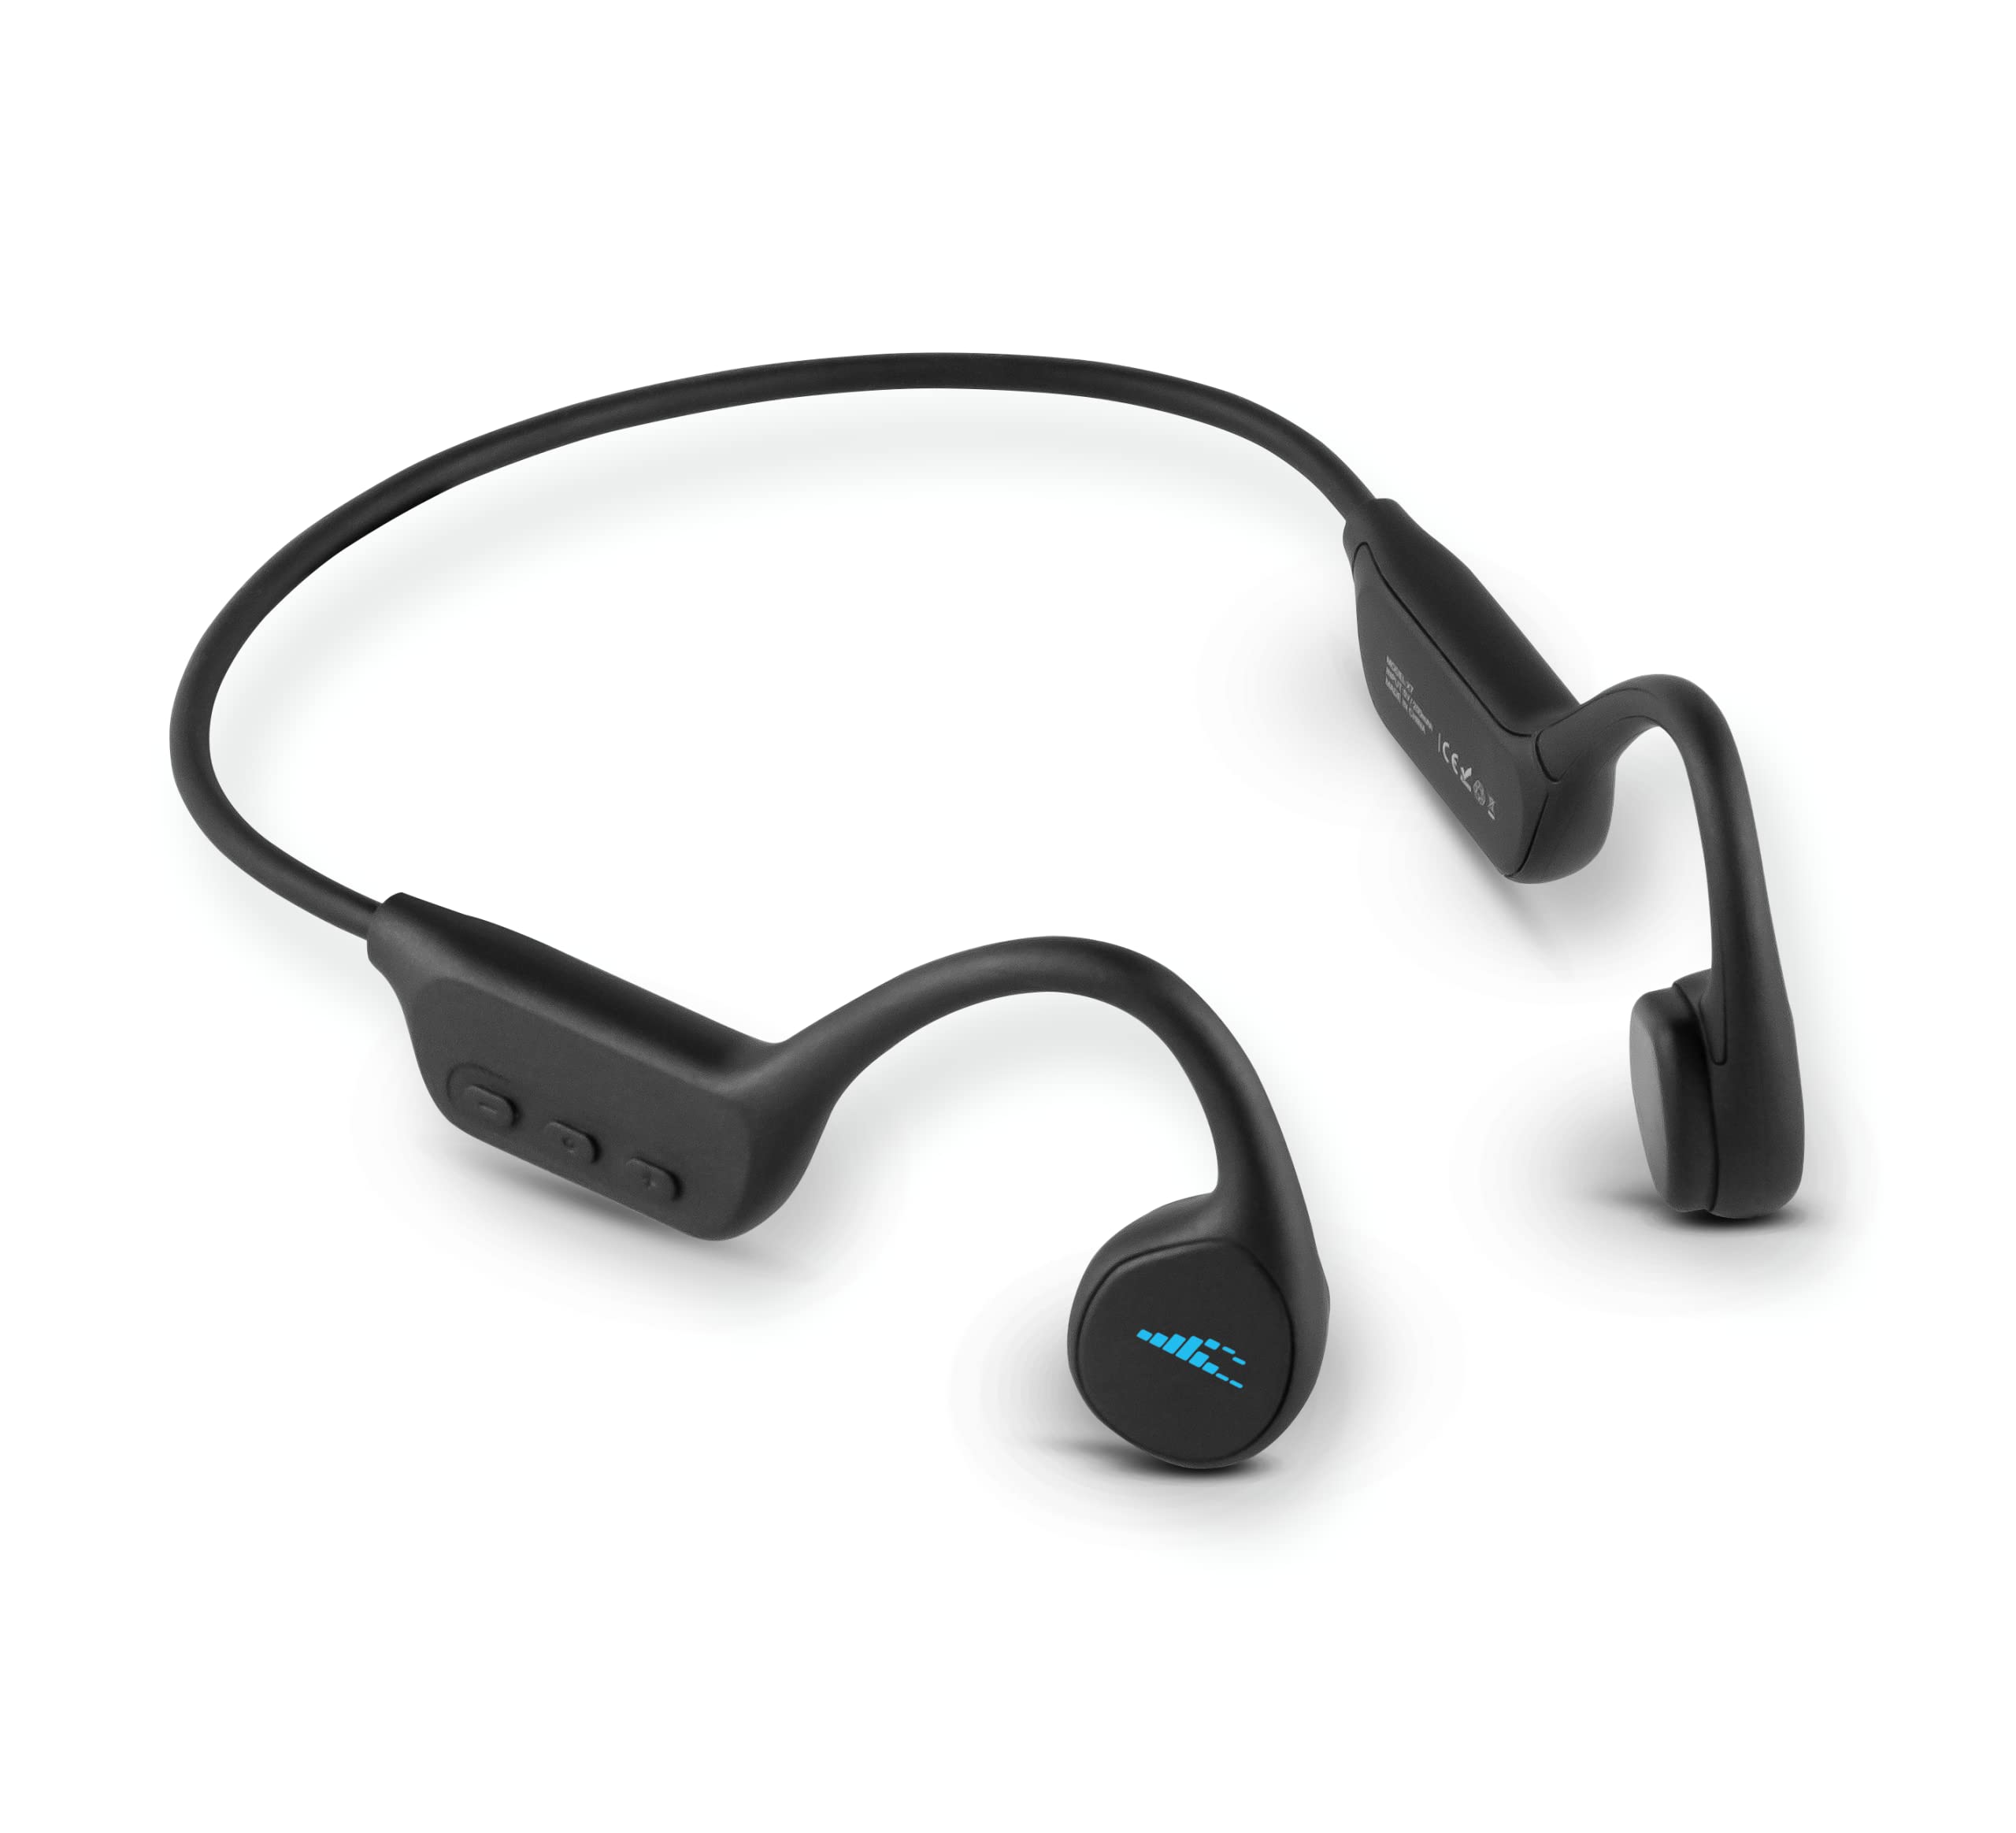 H2O Audio TRI Multi-Sport Waterproof Bone Conduction Headphones Bluetooth Open Ear Headphones with Built-In MP3 Player -up t